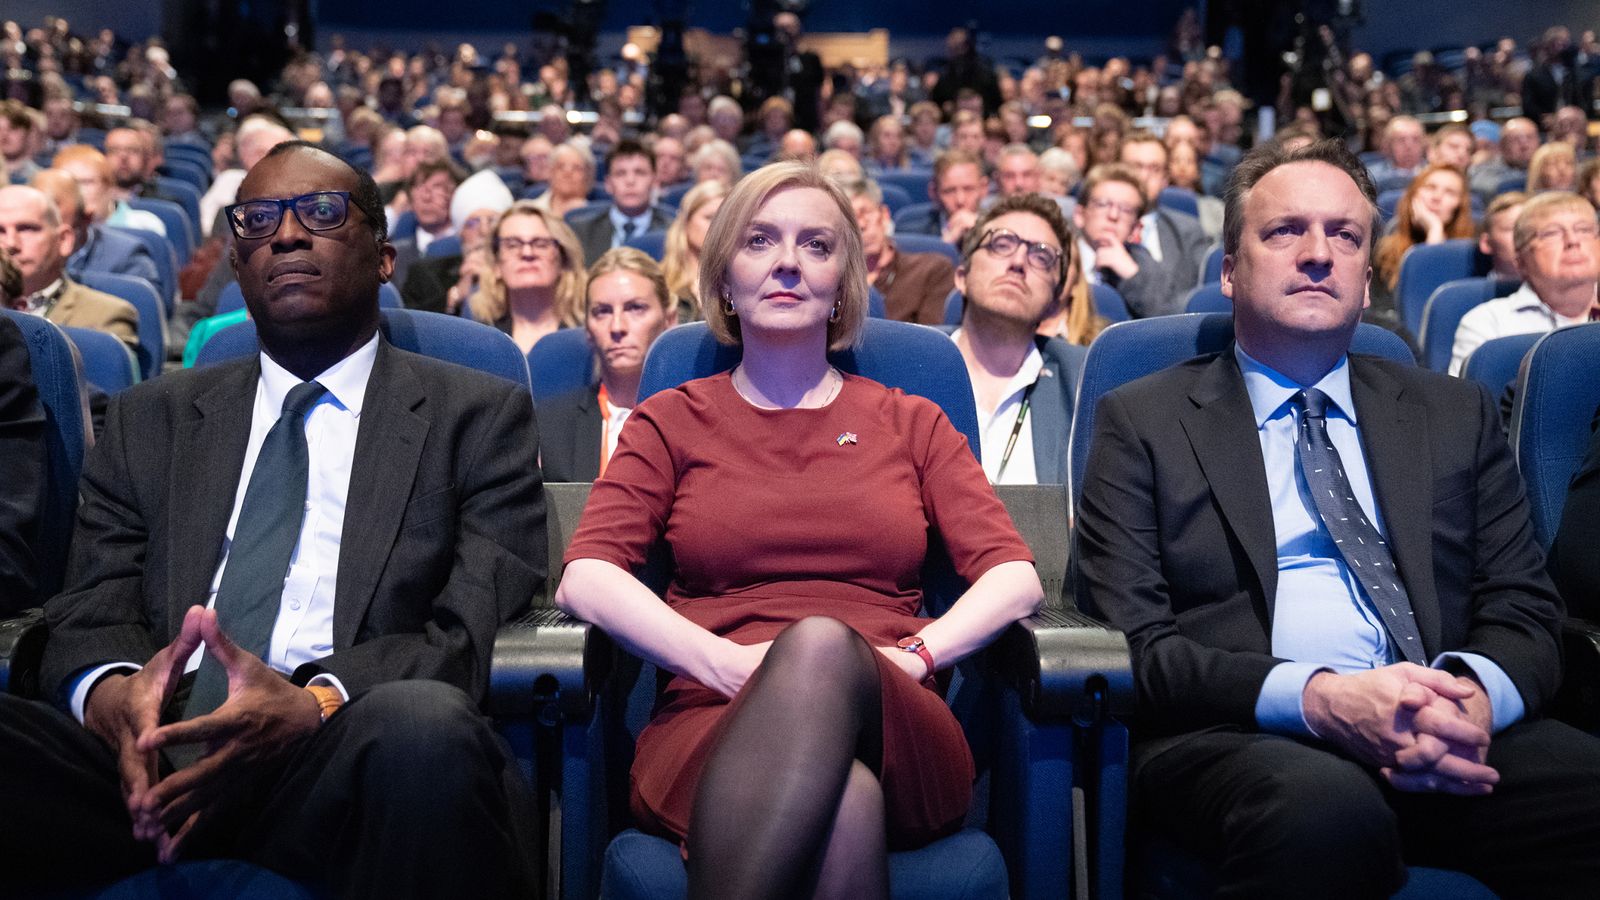 Liz Truss to close Tory conference by defending 'new approach' – after turbulent gathering